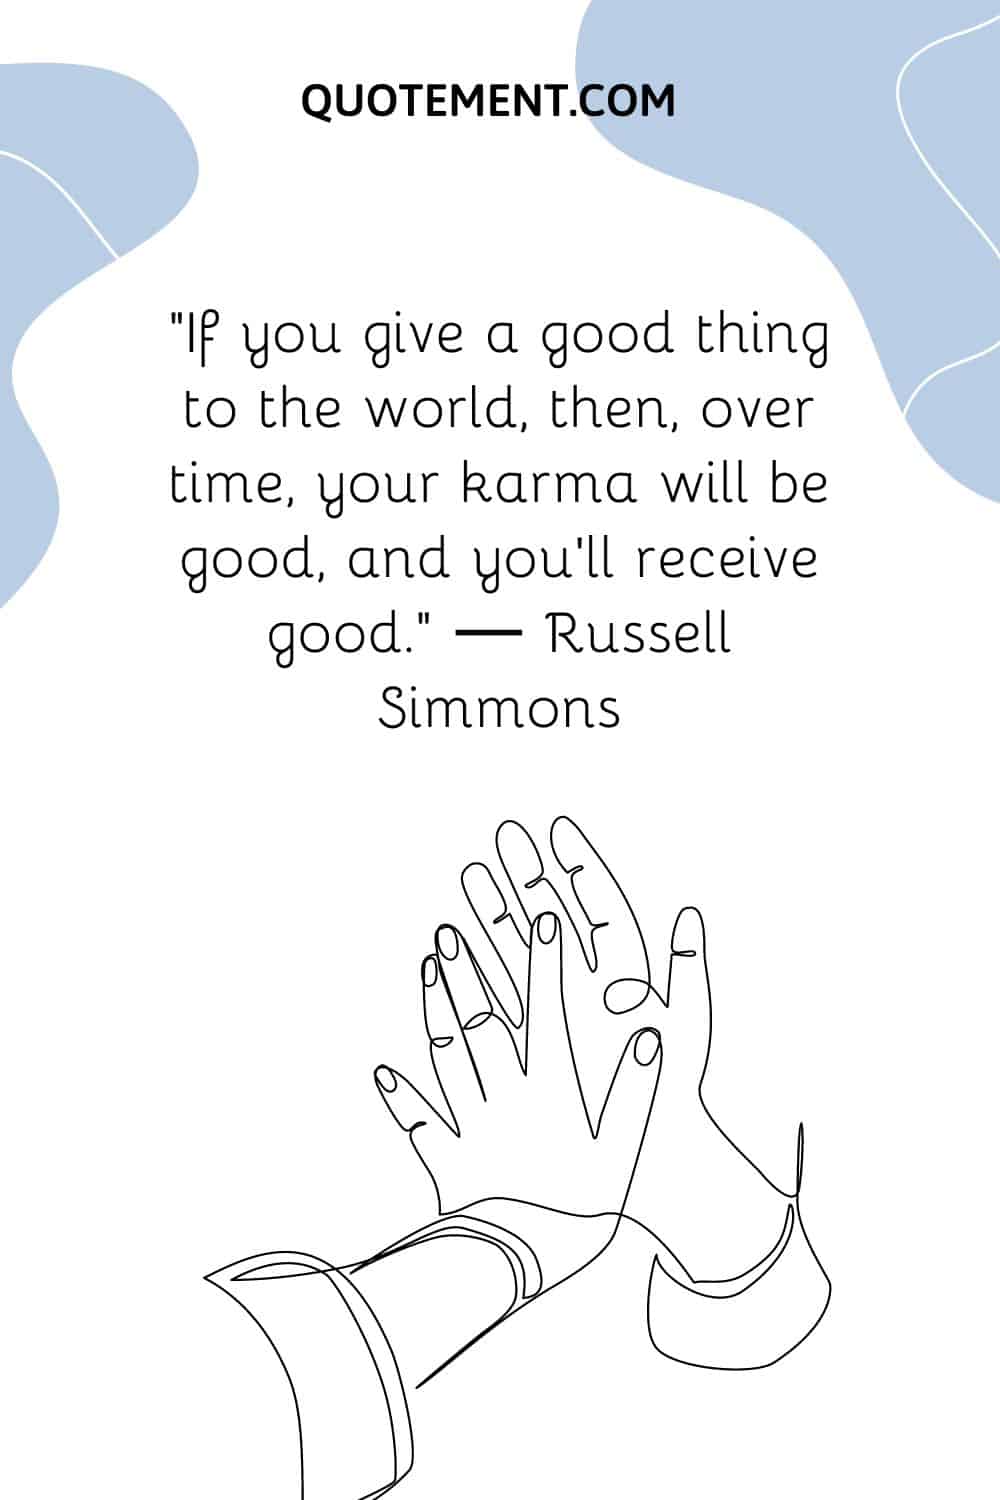 If you give a good thing to the world, then, over time, your karma will be good, and you’ll receive good